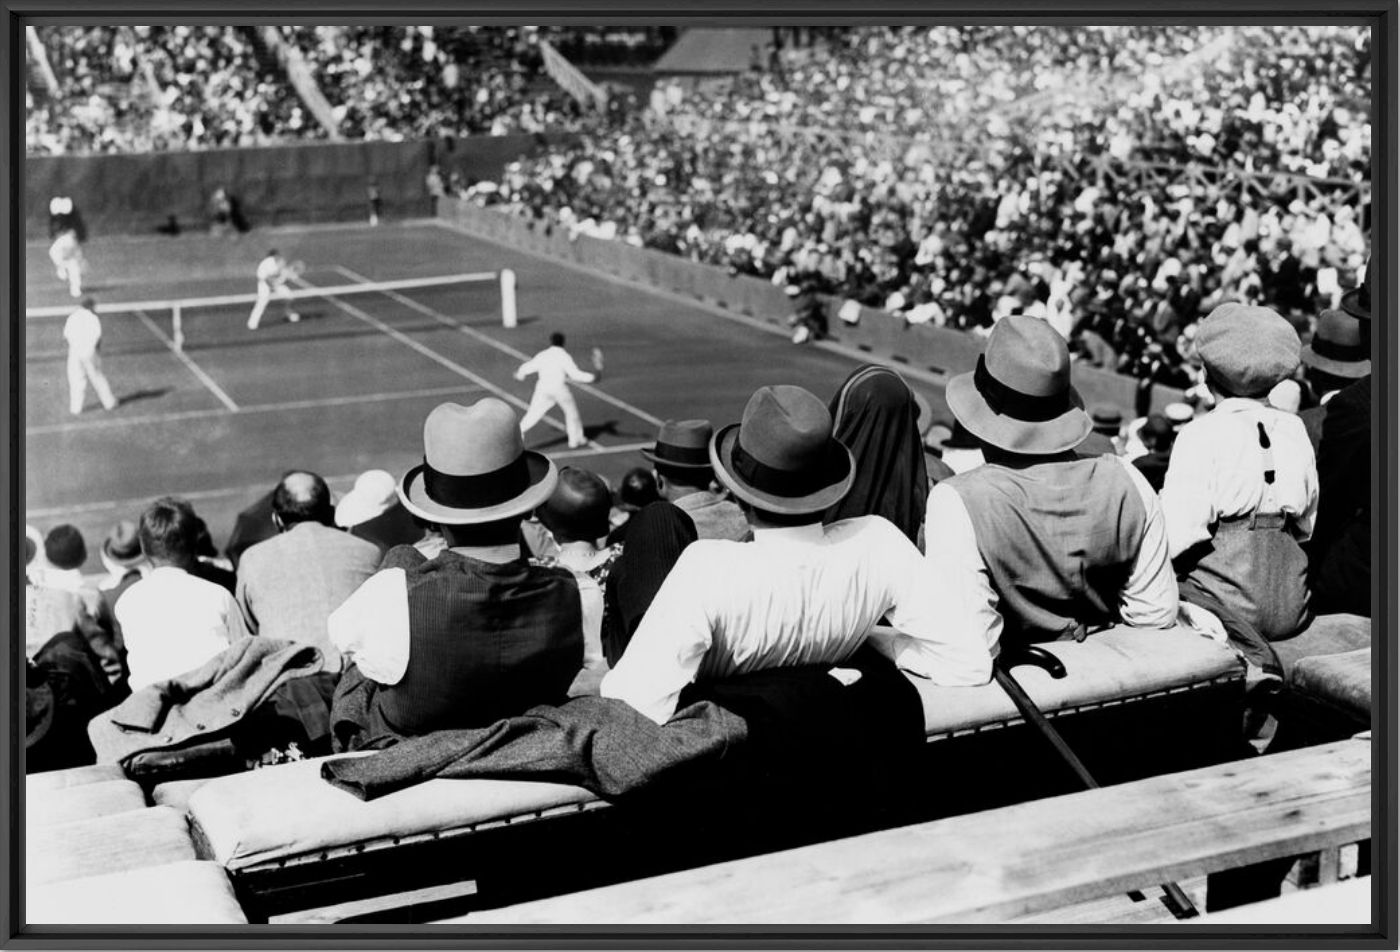 Photograph 1ST INTERNATIONAL FRENCH OPEN 1928 -  GAMMA AGENCY - Picture painting